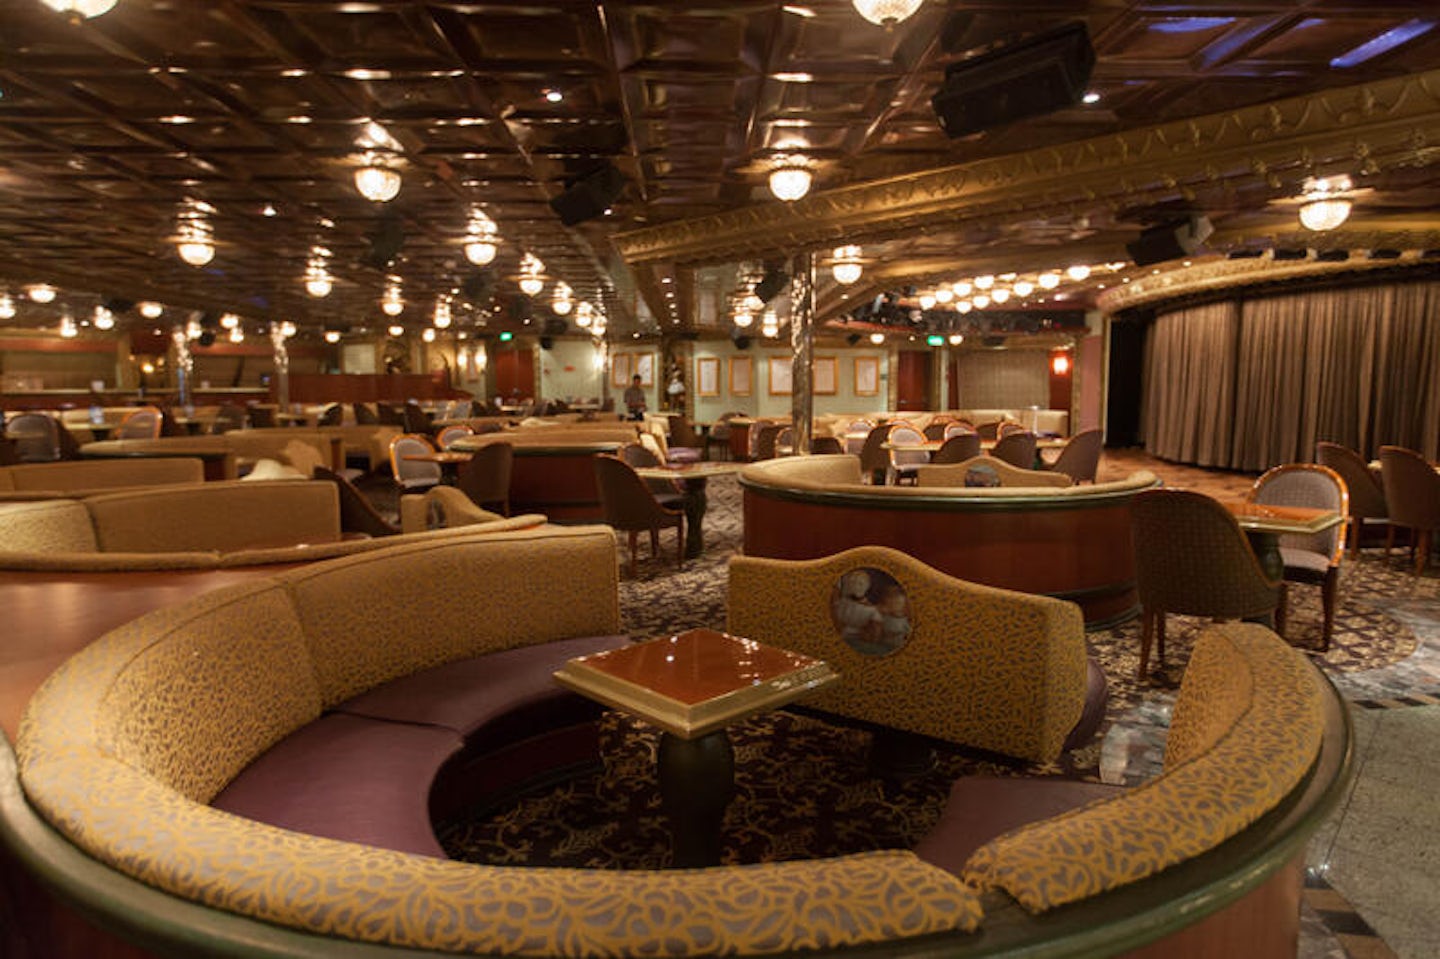 Degas Aft Lounge on Carnival Conquest